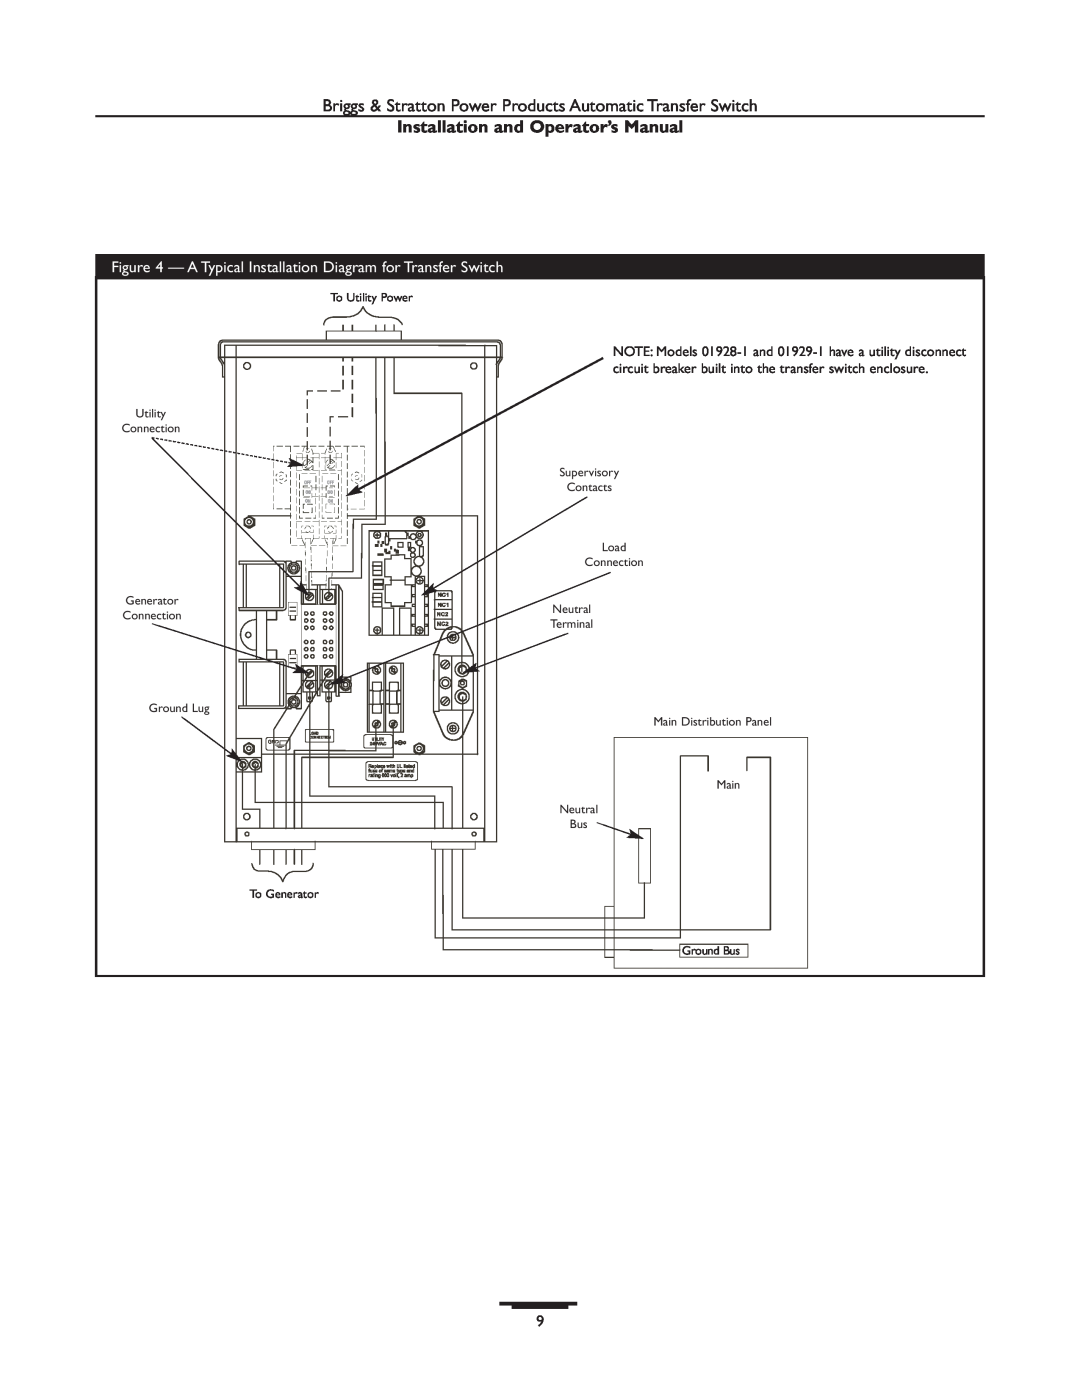 Briggs & Stratton 01814-1, 01928-1 Installation and Operator’s Manual, A Typical Installation Diagram for Transfer Switch 